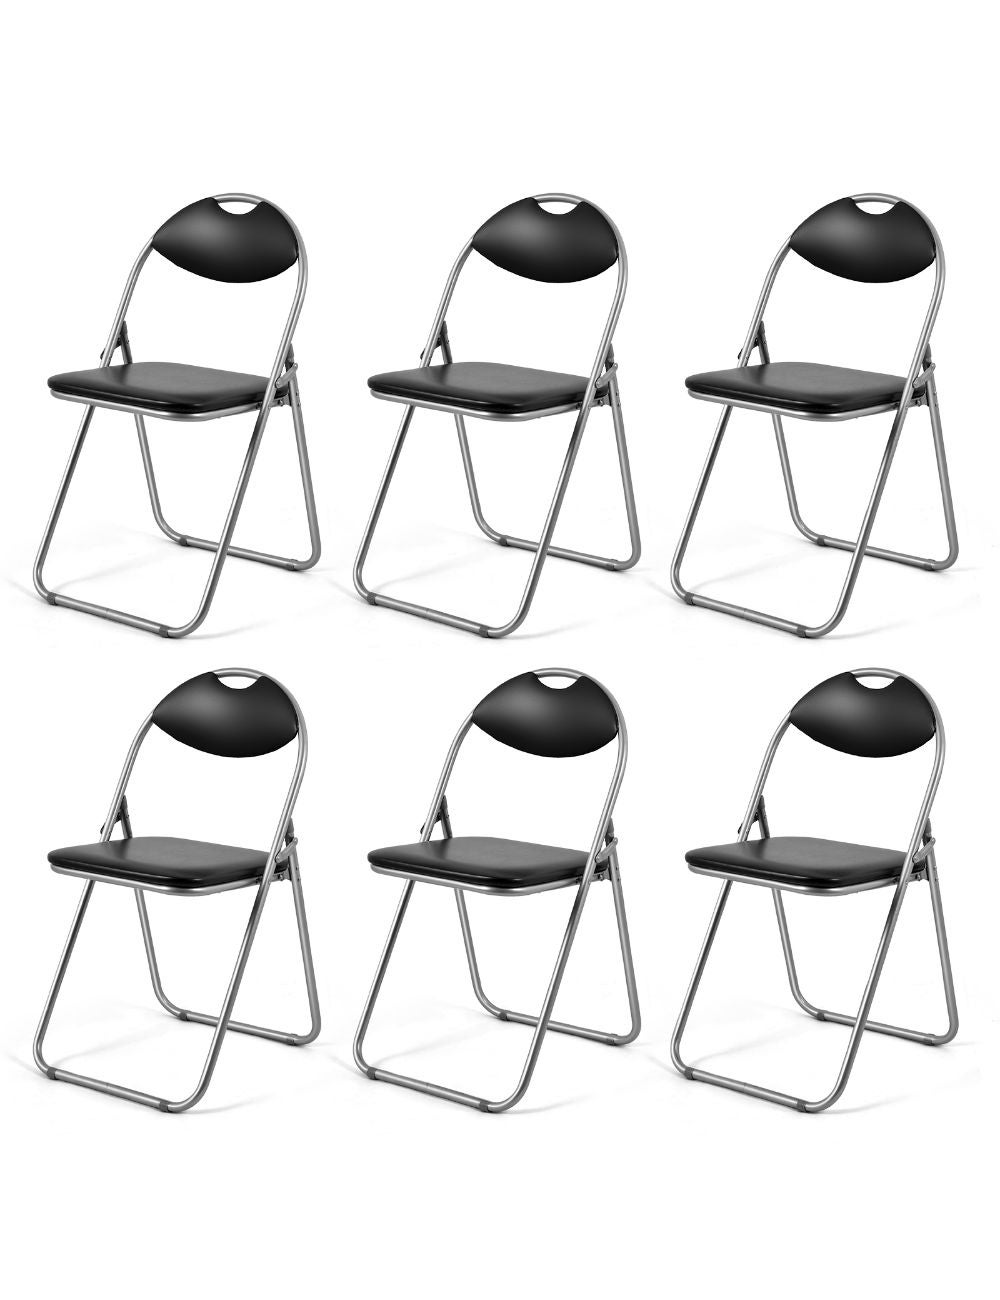 Costway 6x Folding Outdoor Chairs Folding Office Chairs Dining Chairs ...